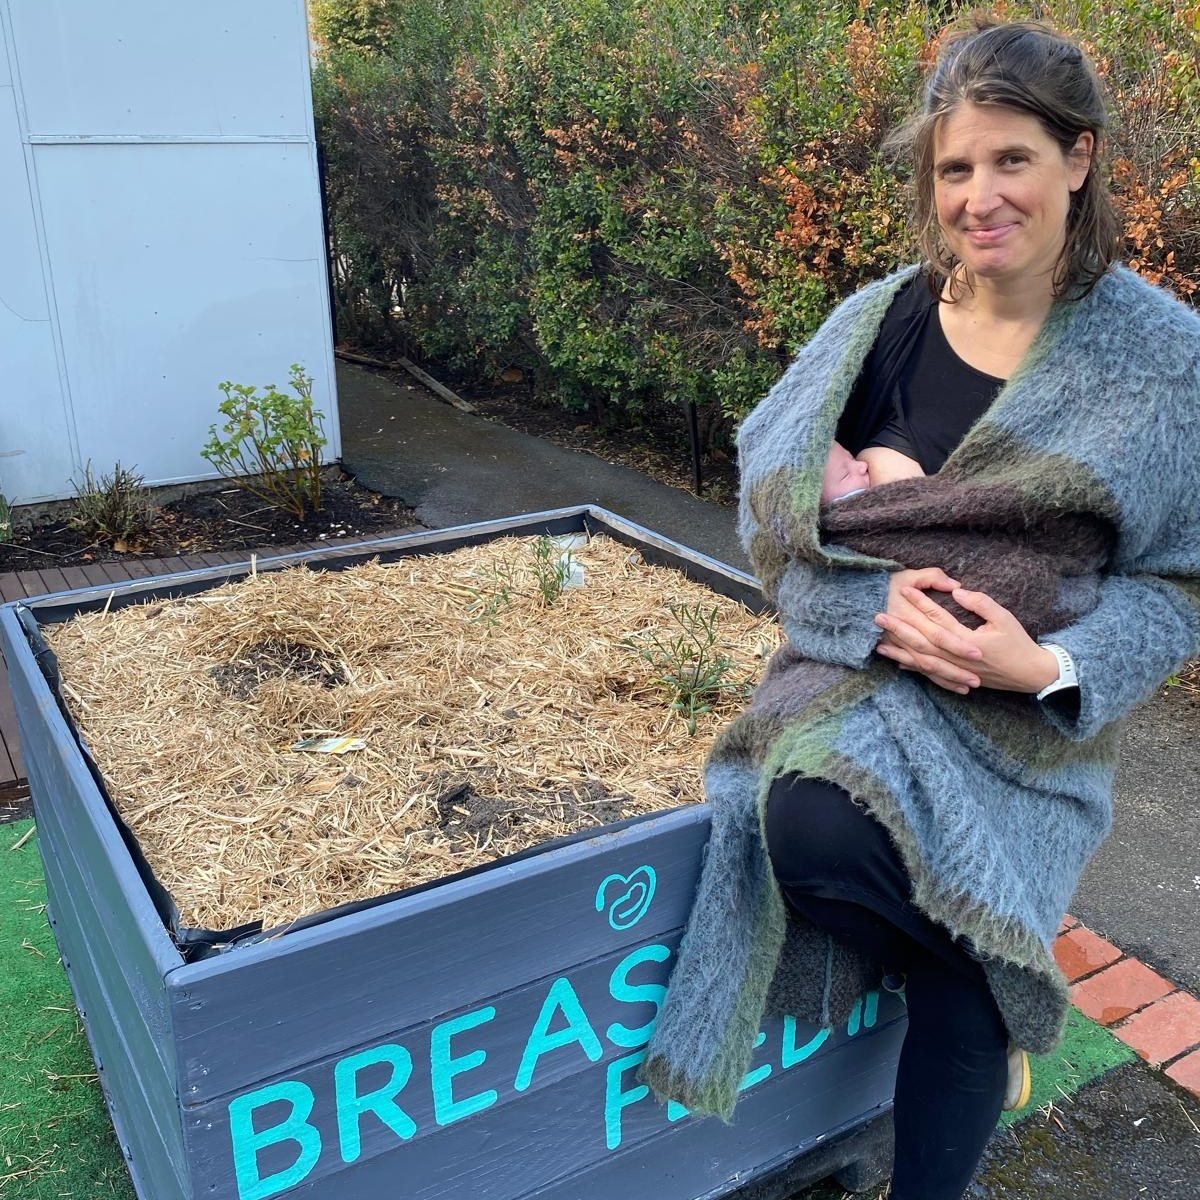 Our beautiful MAMA client Stef and her new bubba Val enjoying the &lsquo;breastfeeding&rsquo; garden; one of four of our newly painted raised garden beds that are housing useful plants for each phase of our care! ❤️

.
#mamabirth #melbournemums #bris